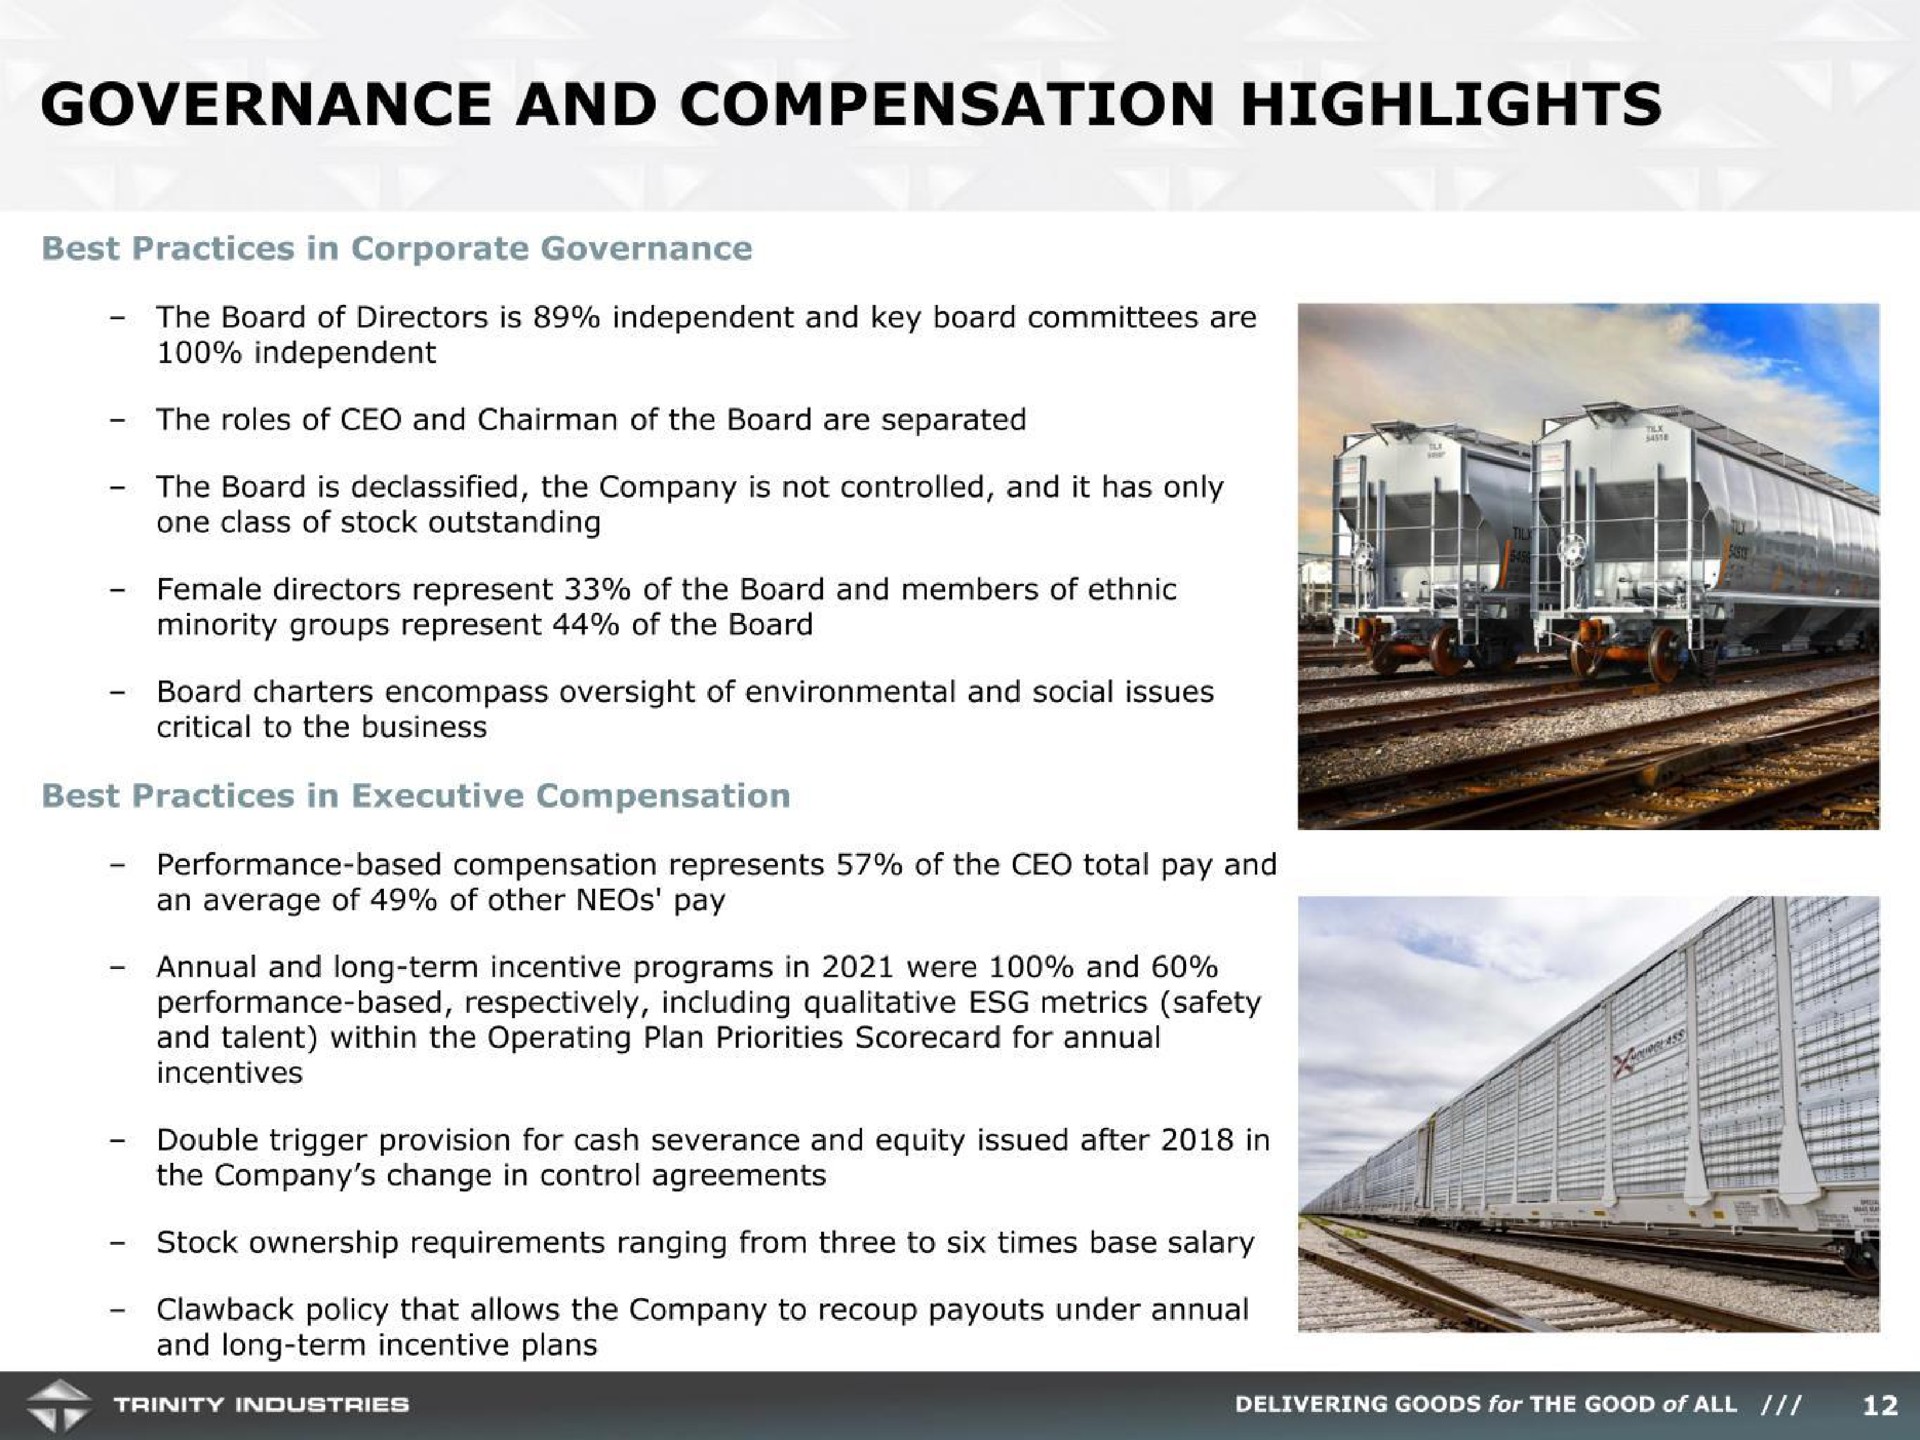 governance and compensation highlights | Trinity Industries